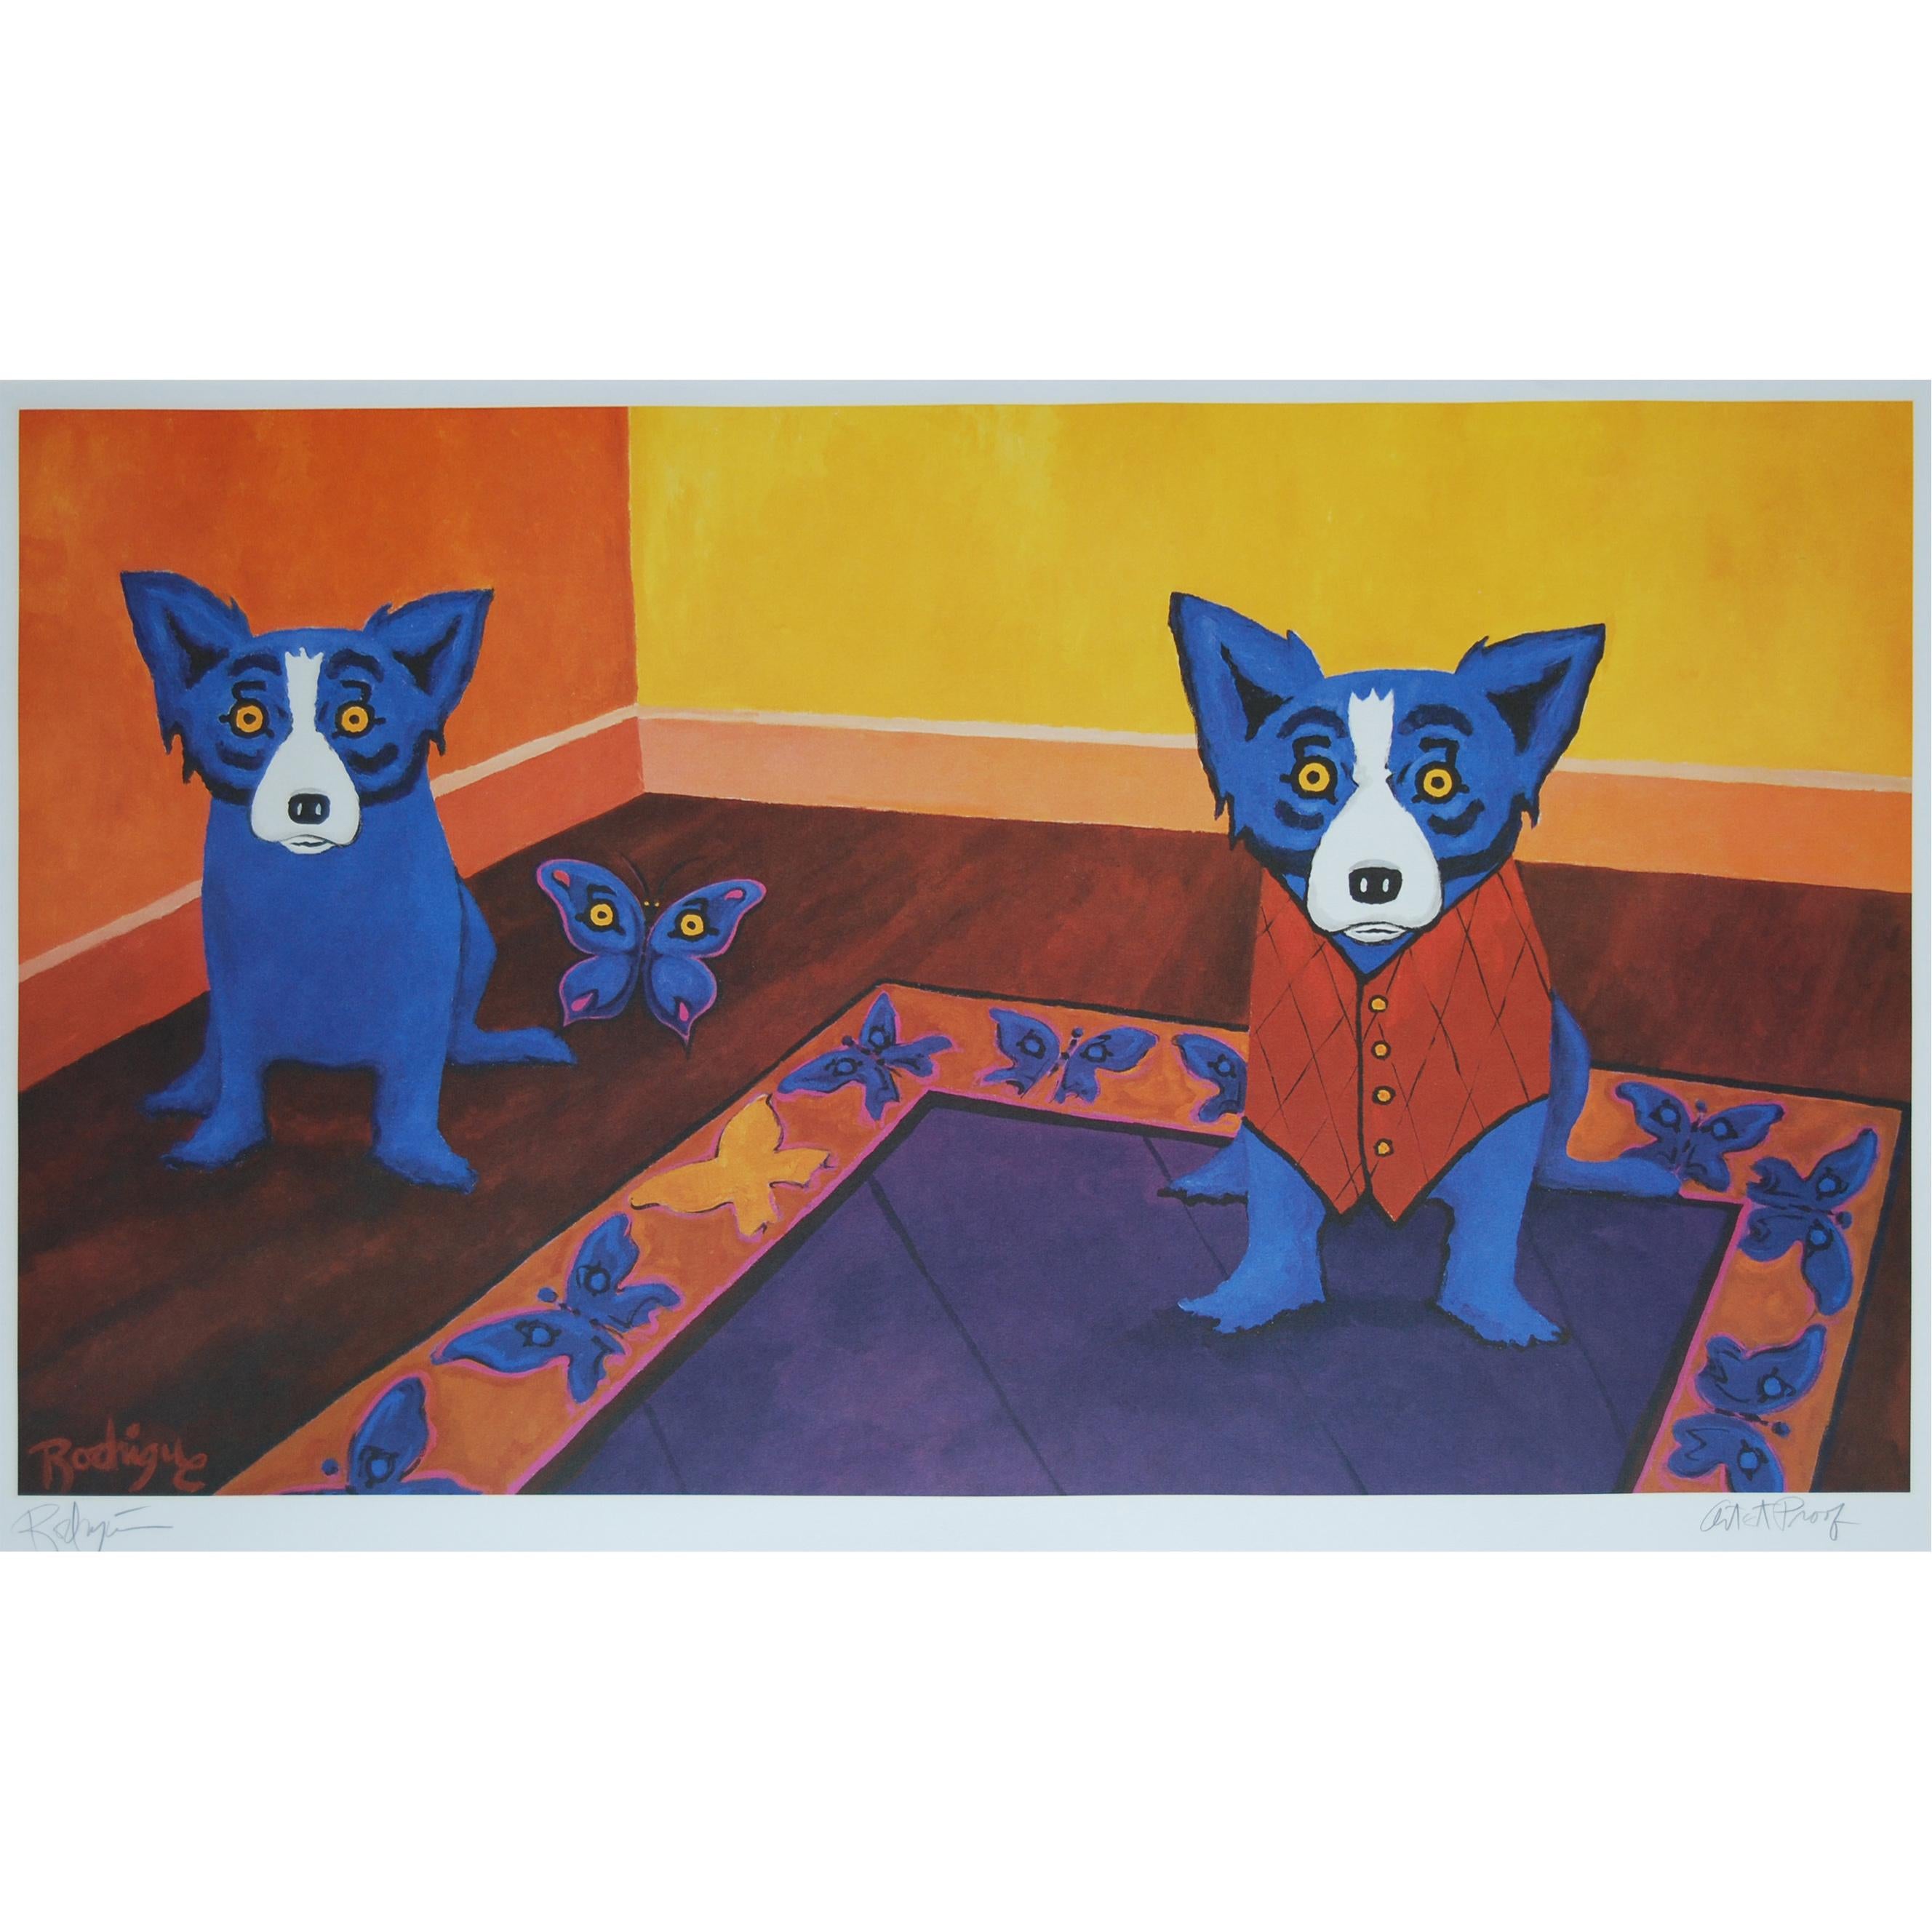 George Rodrigue Animal Print - Butterflies Are Free - Signed Silkscreen Print Blue Dog